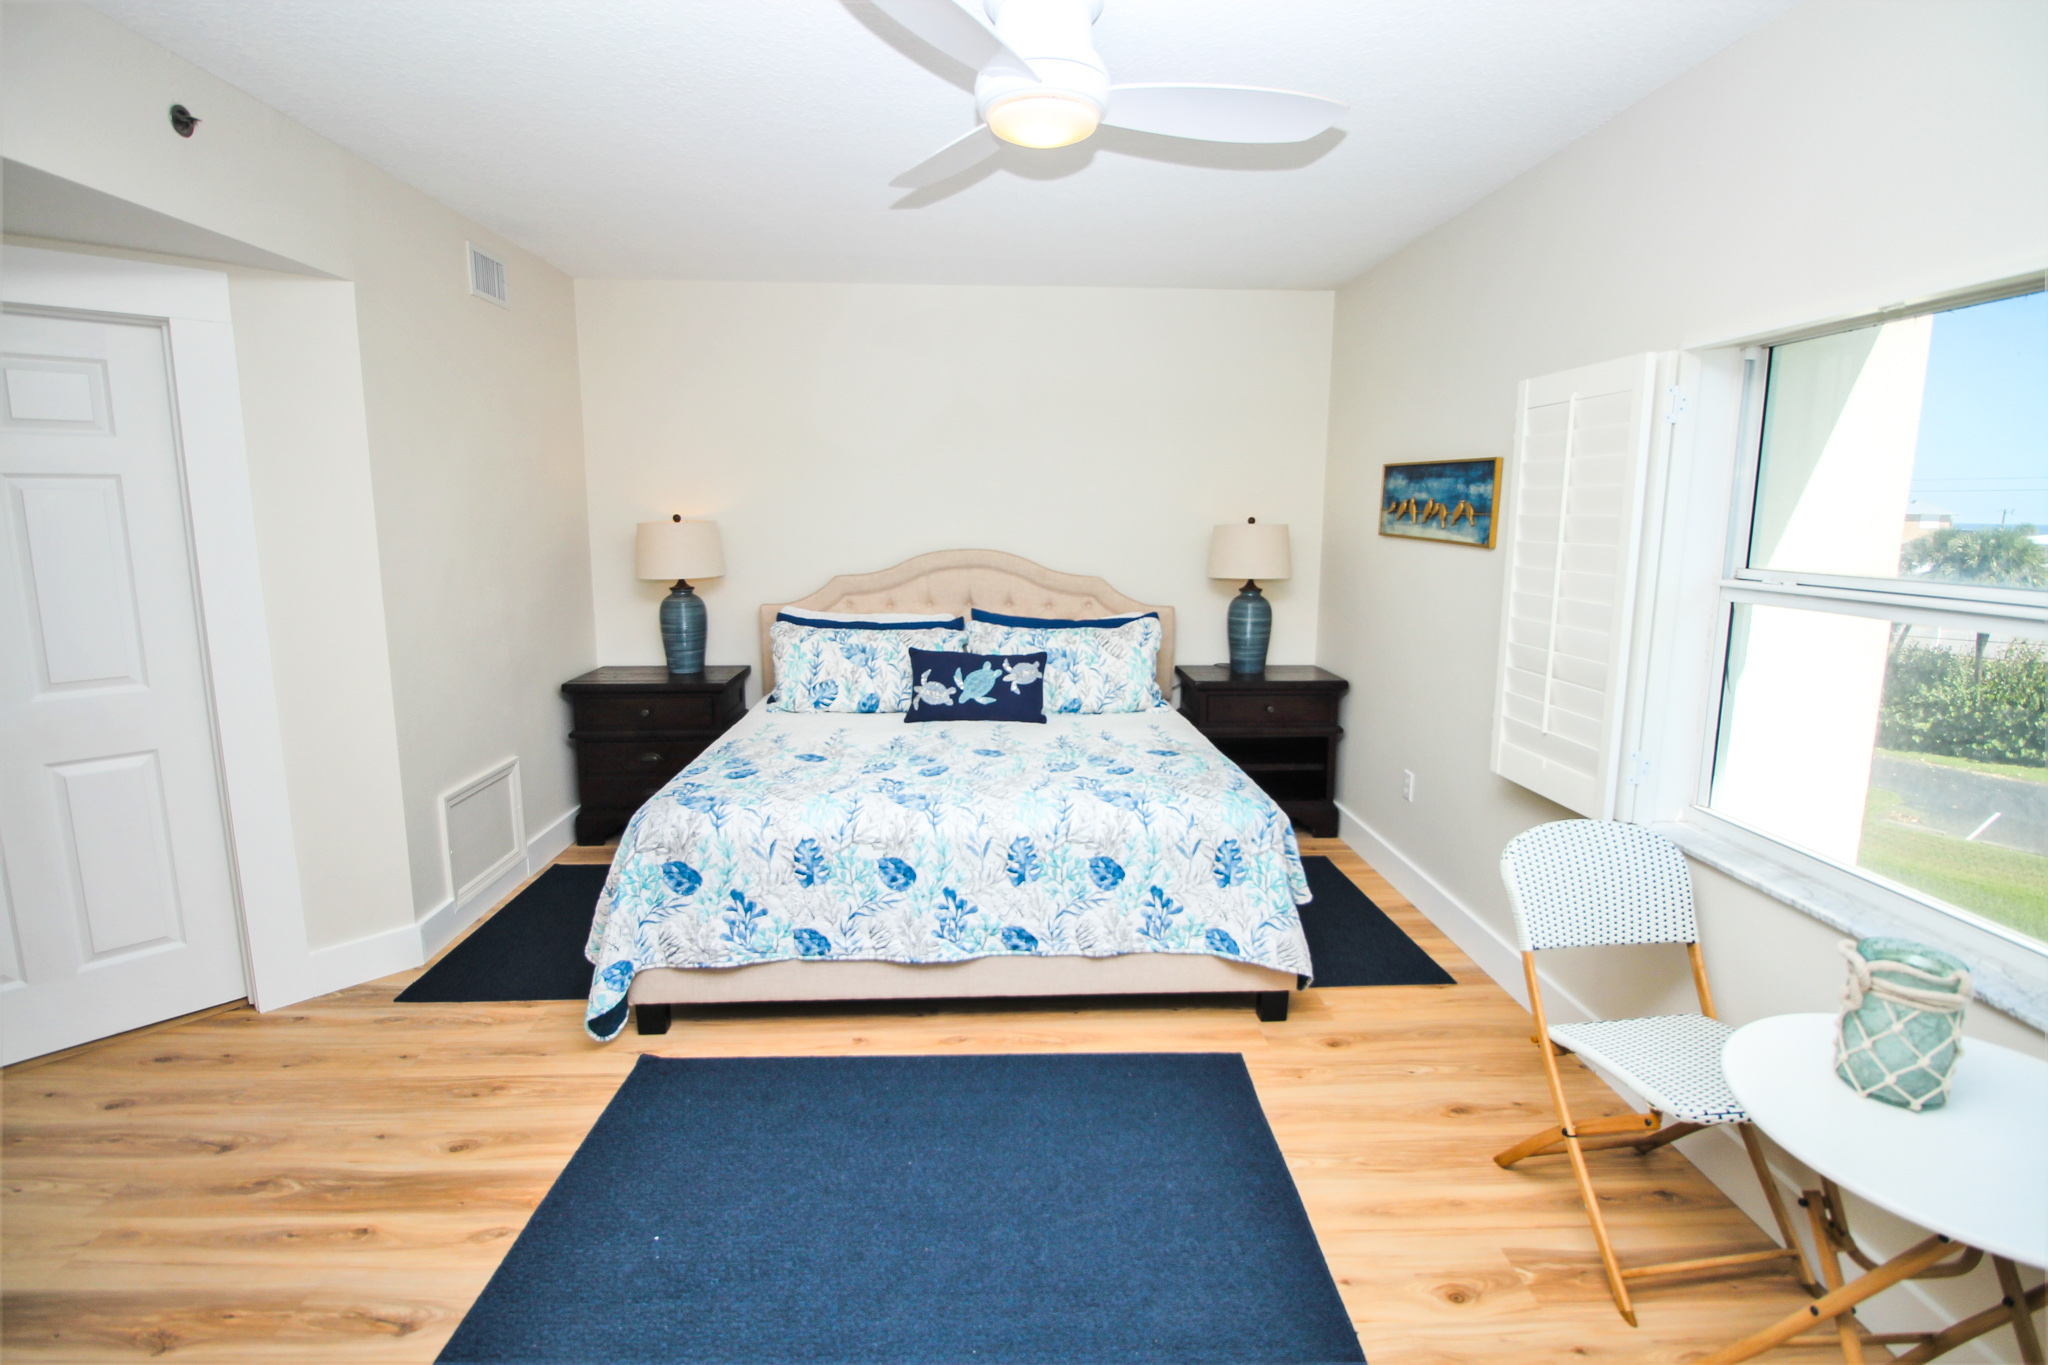 Primary bedroom with blue hues